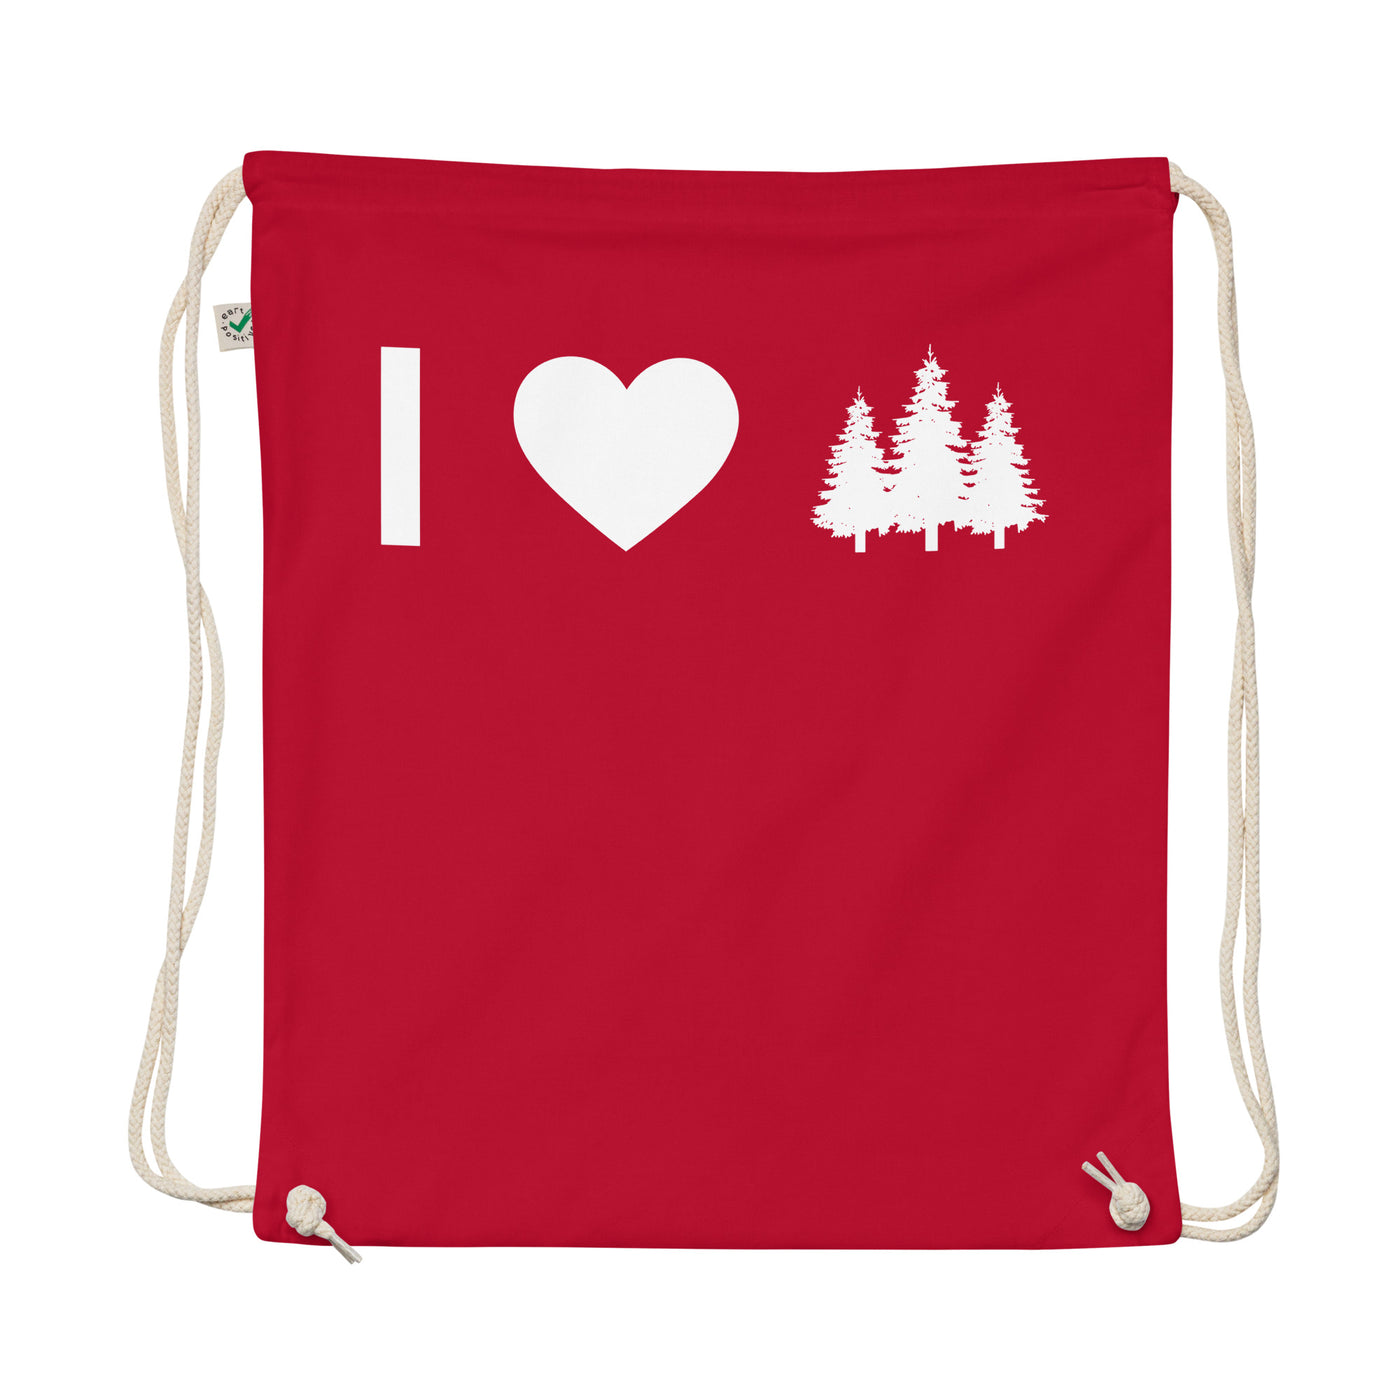 I Heart And Trees - Organic Turnbeutel camping